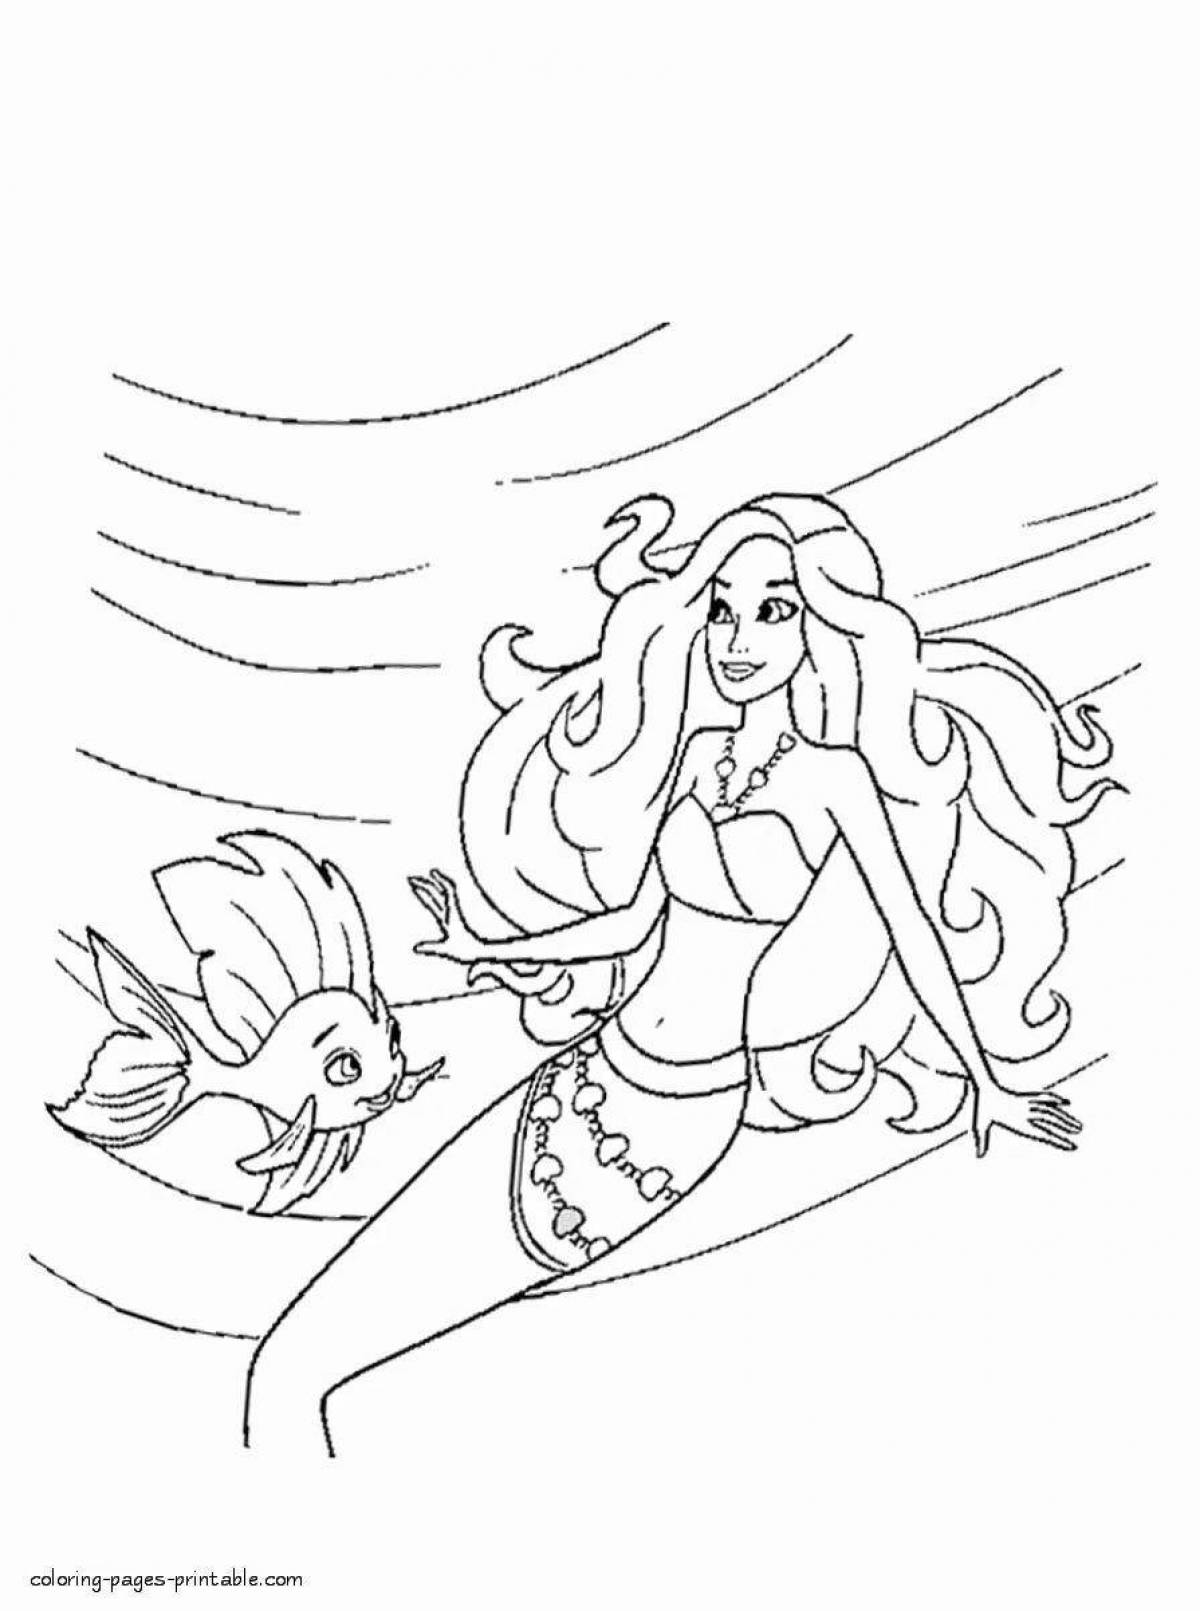 Radiant coloring page кукла барби русалка